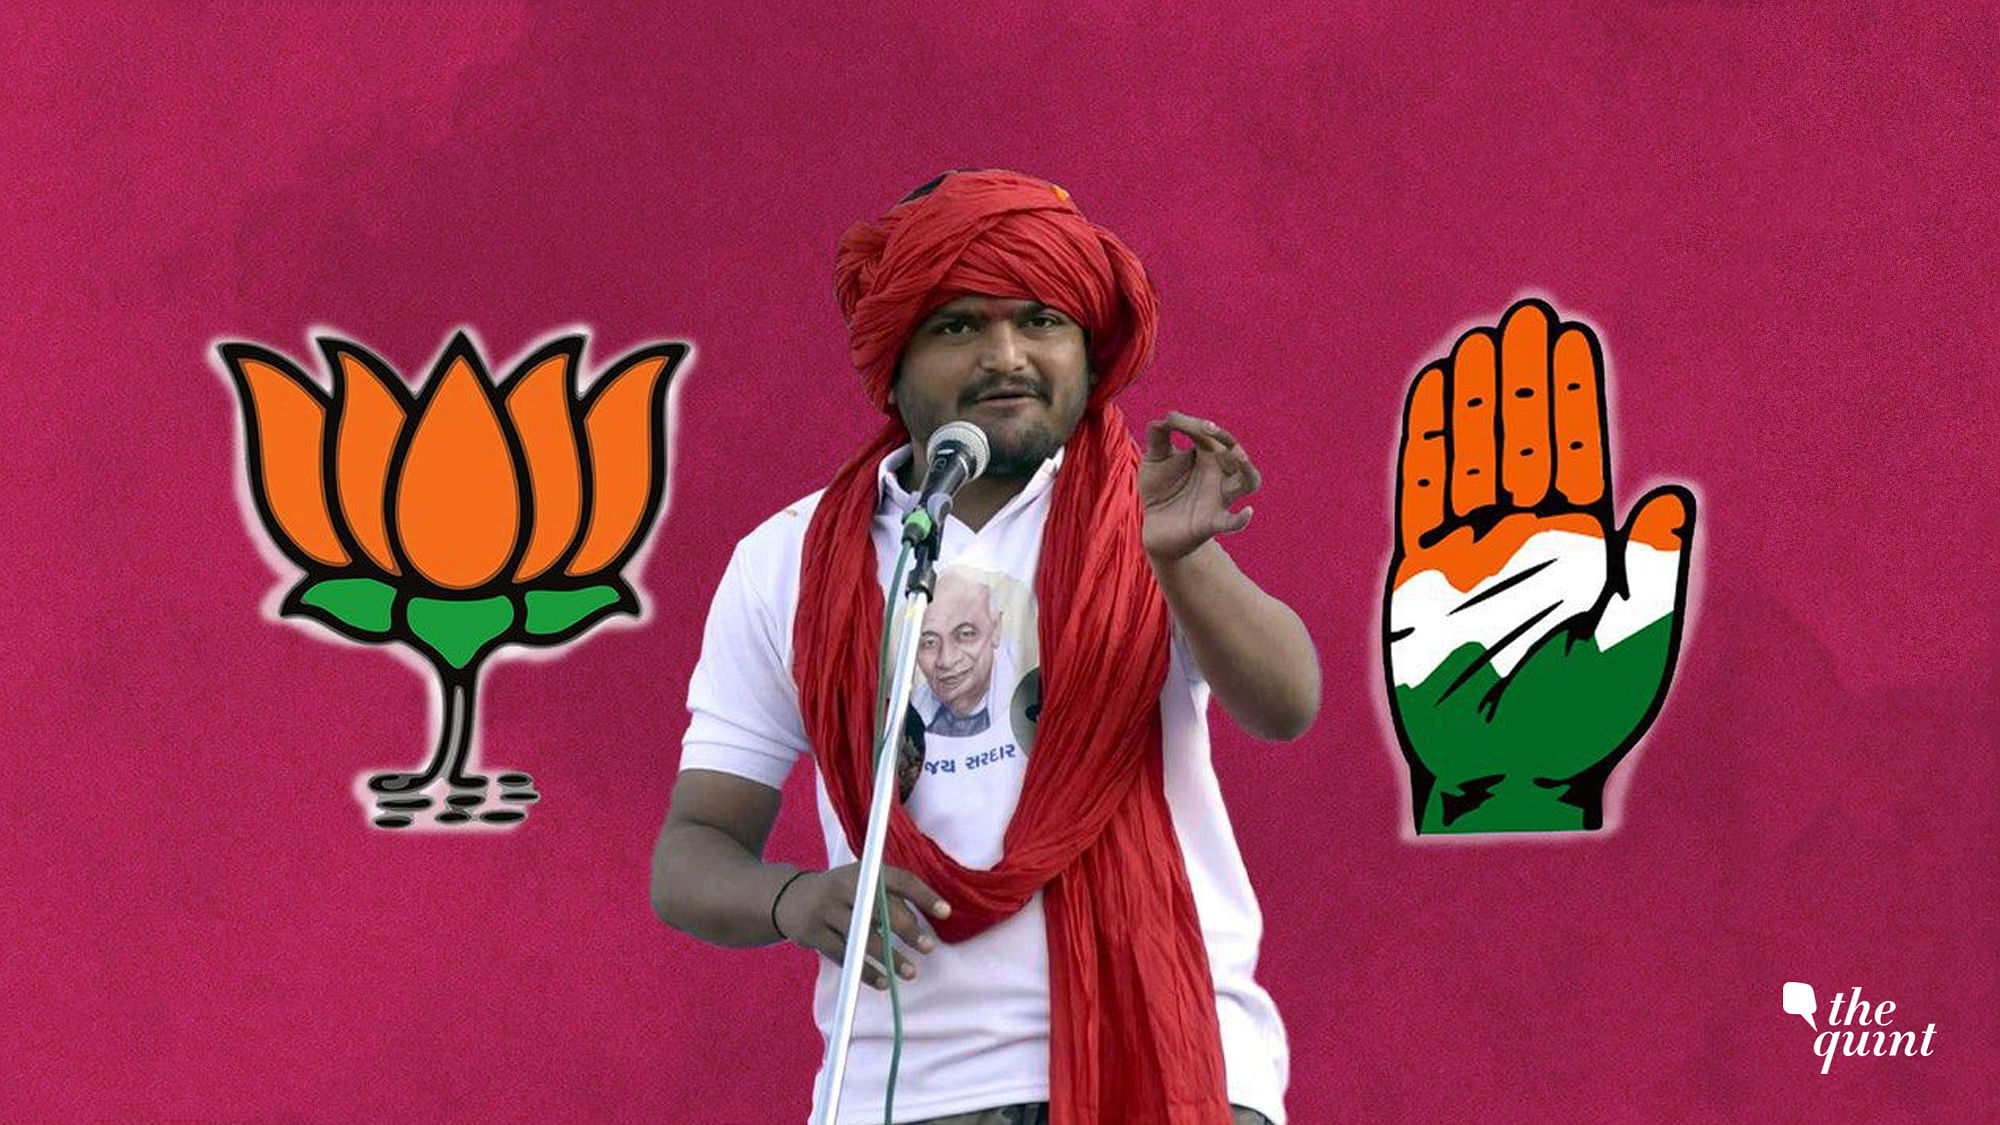 Hardik’s demand for loan waivers for farmers sounds like he is leaning towards the opposition Congress in the state.